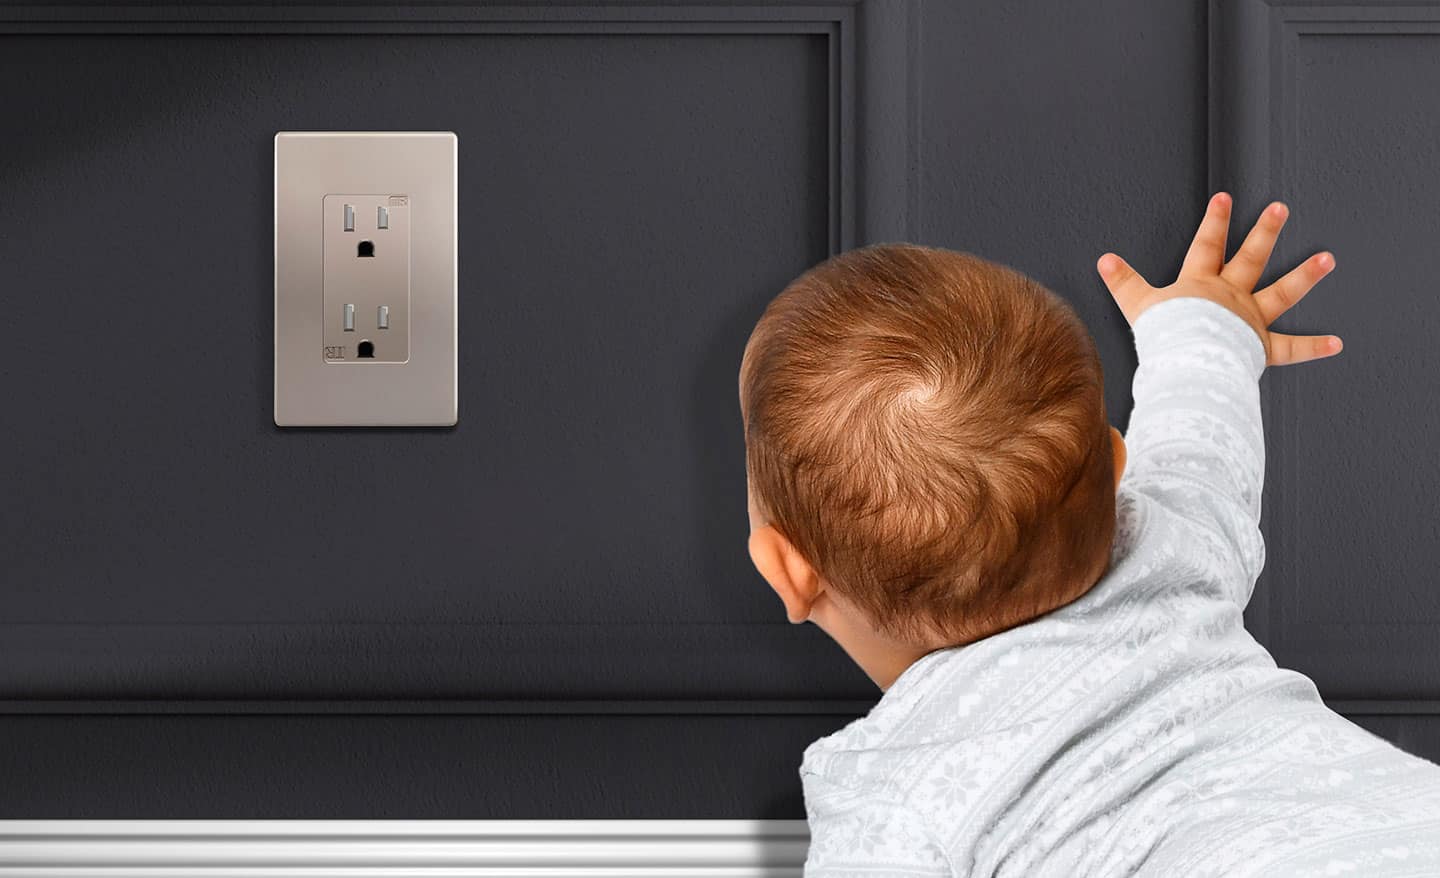 A baby crawling up to a tamper-resistant receptacle on a wall.